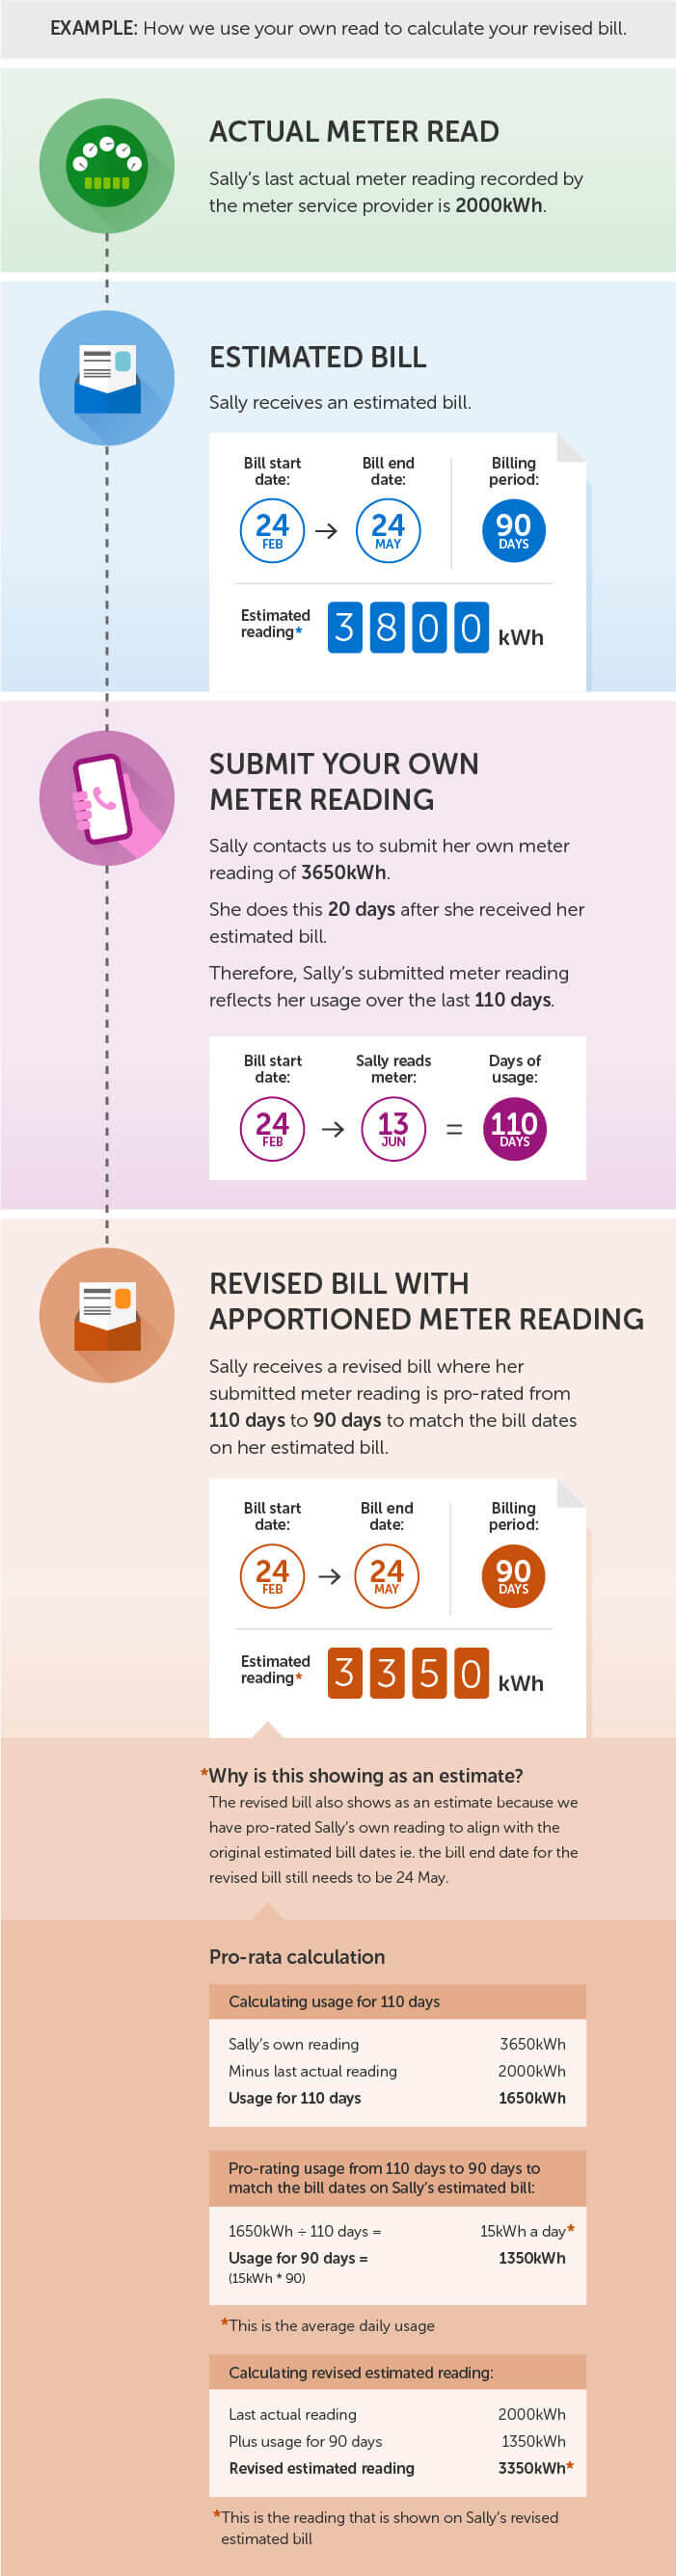 Example: How we use your own read to calculate your revised bill.